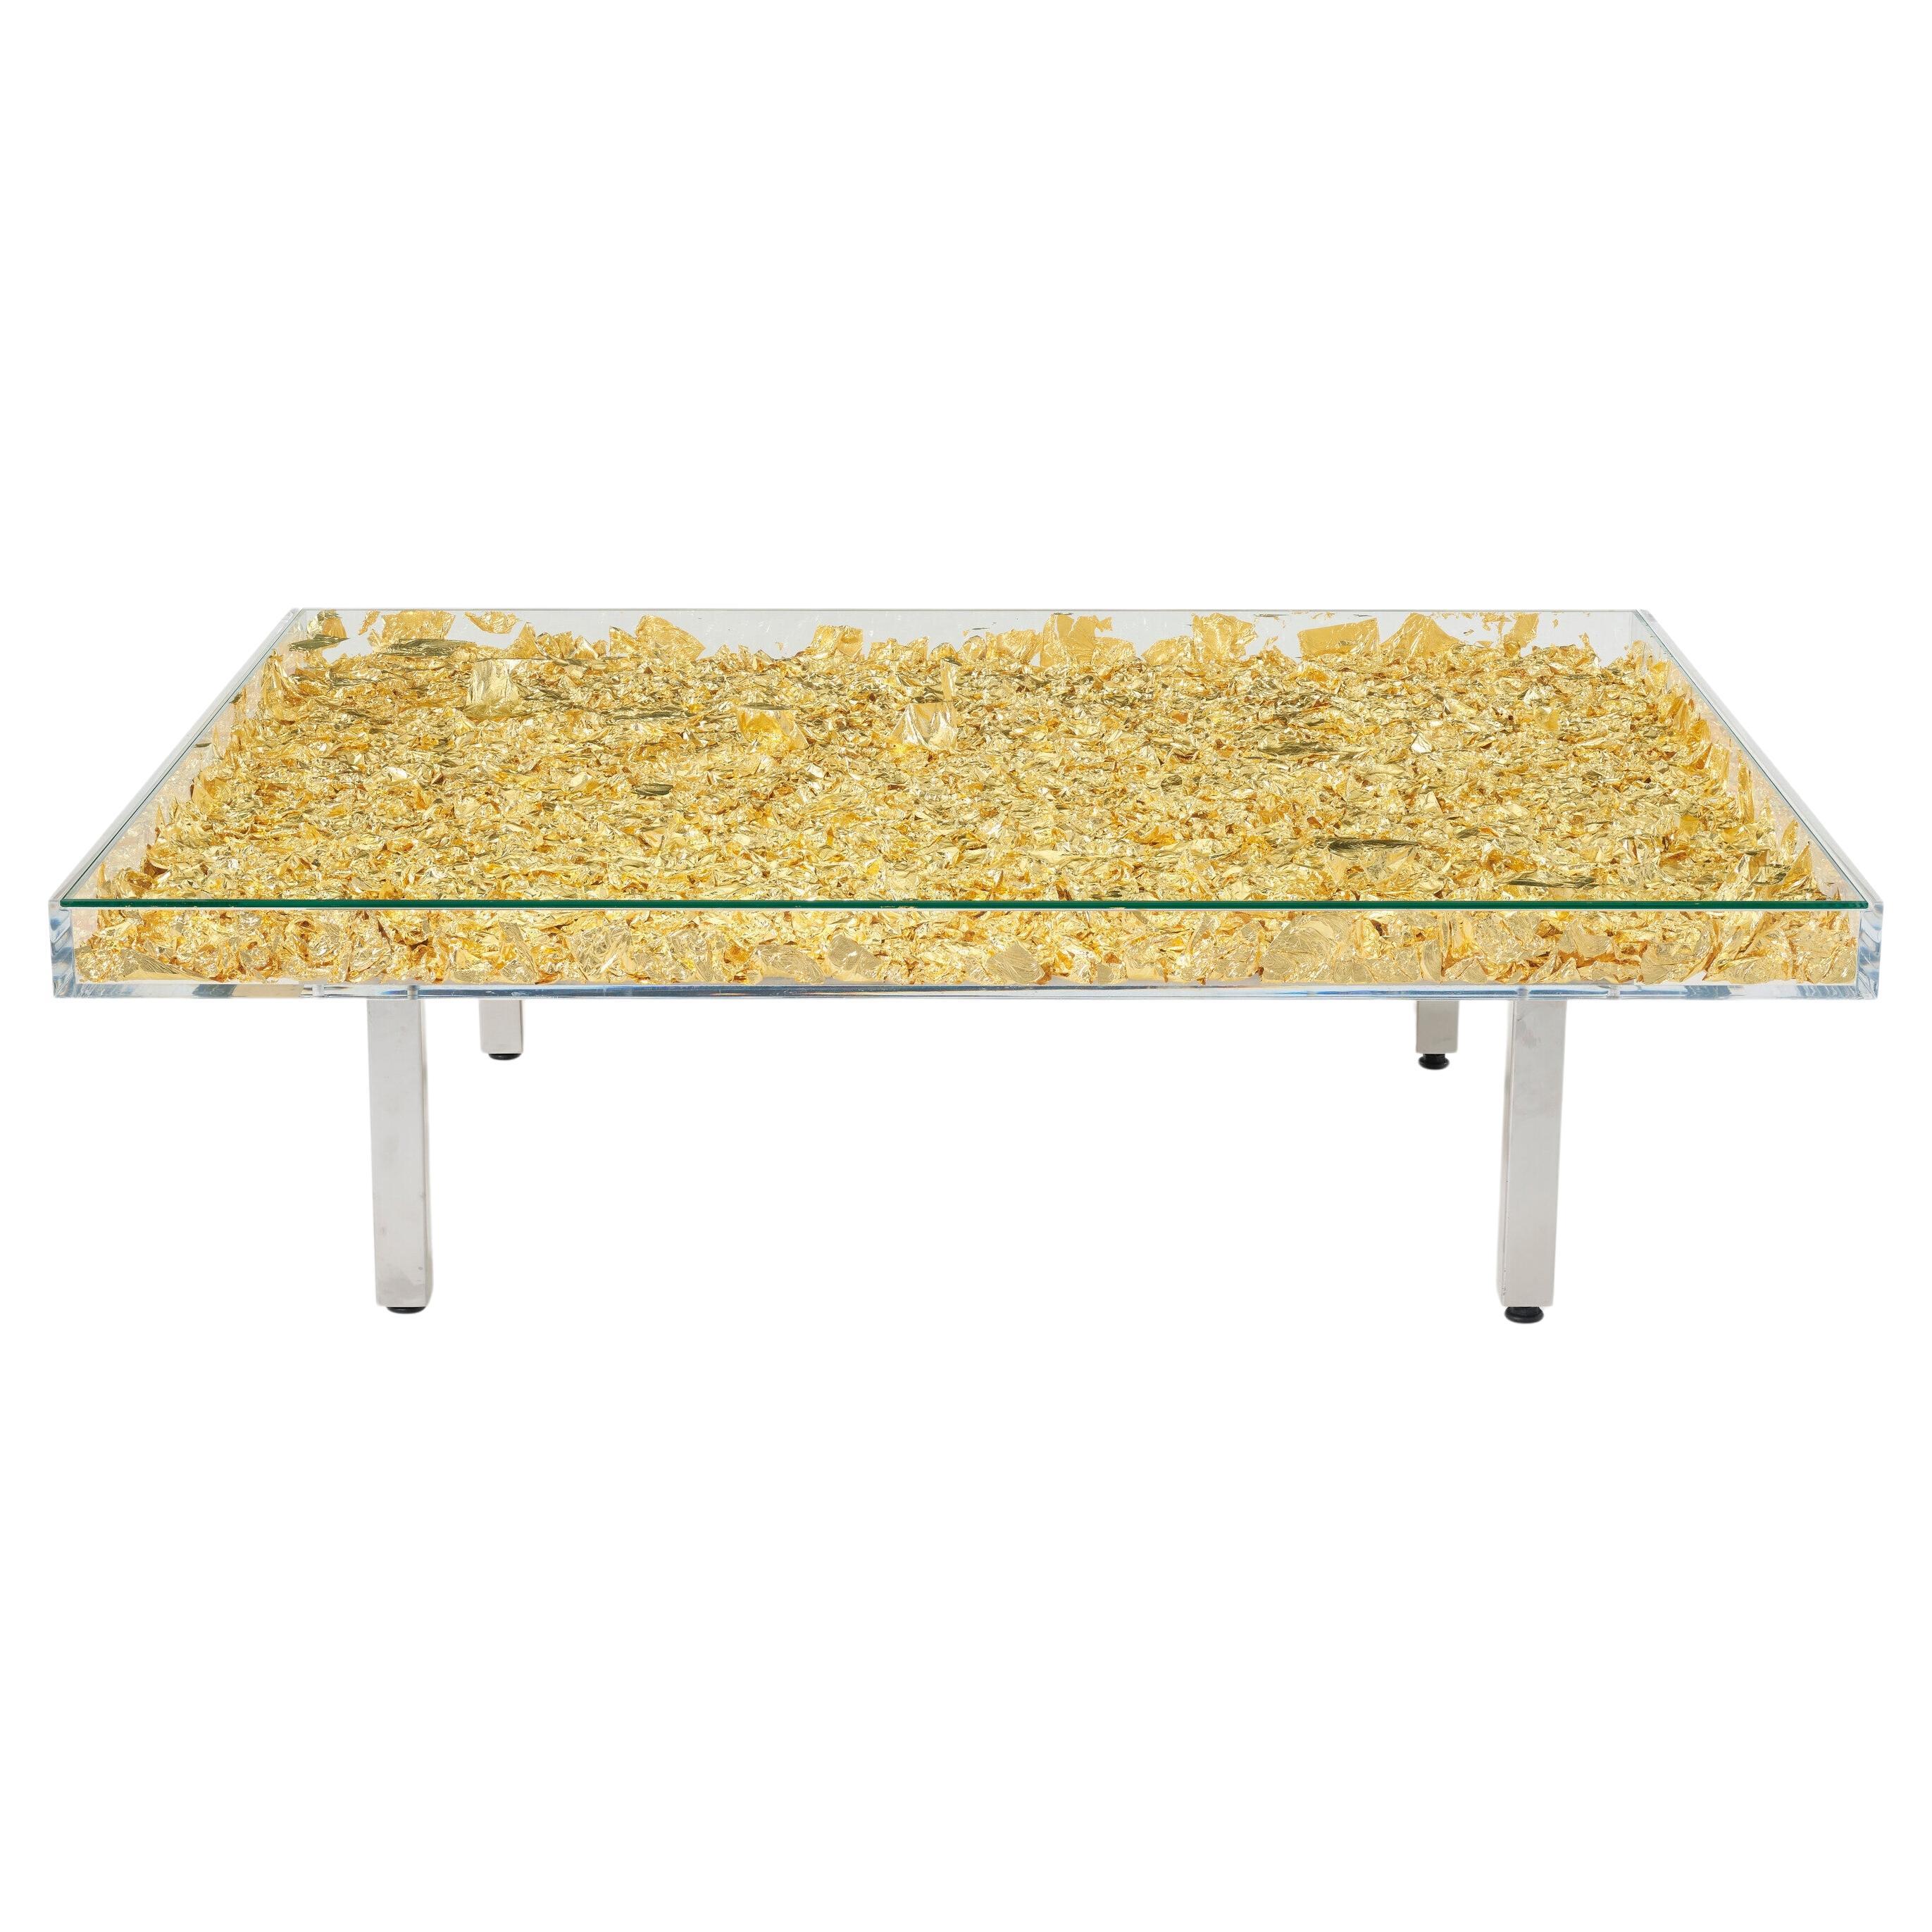 Yves Klein "Monogold" Gold Glass Table, Clear Glass Acrylic Box, France 1960s For Sale